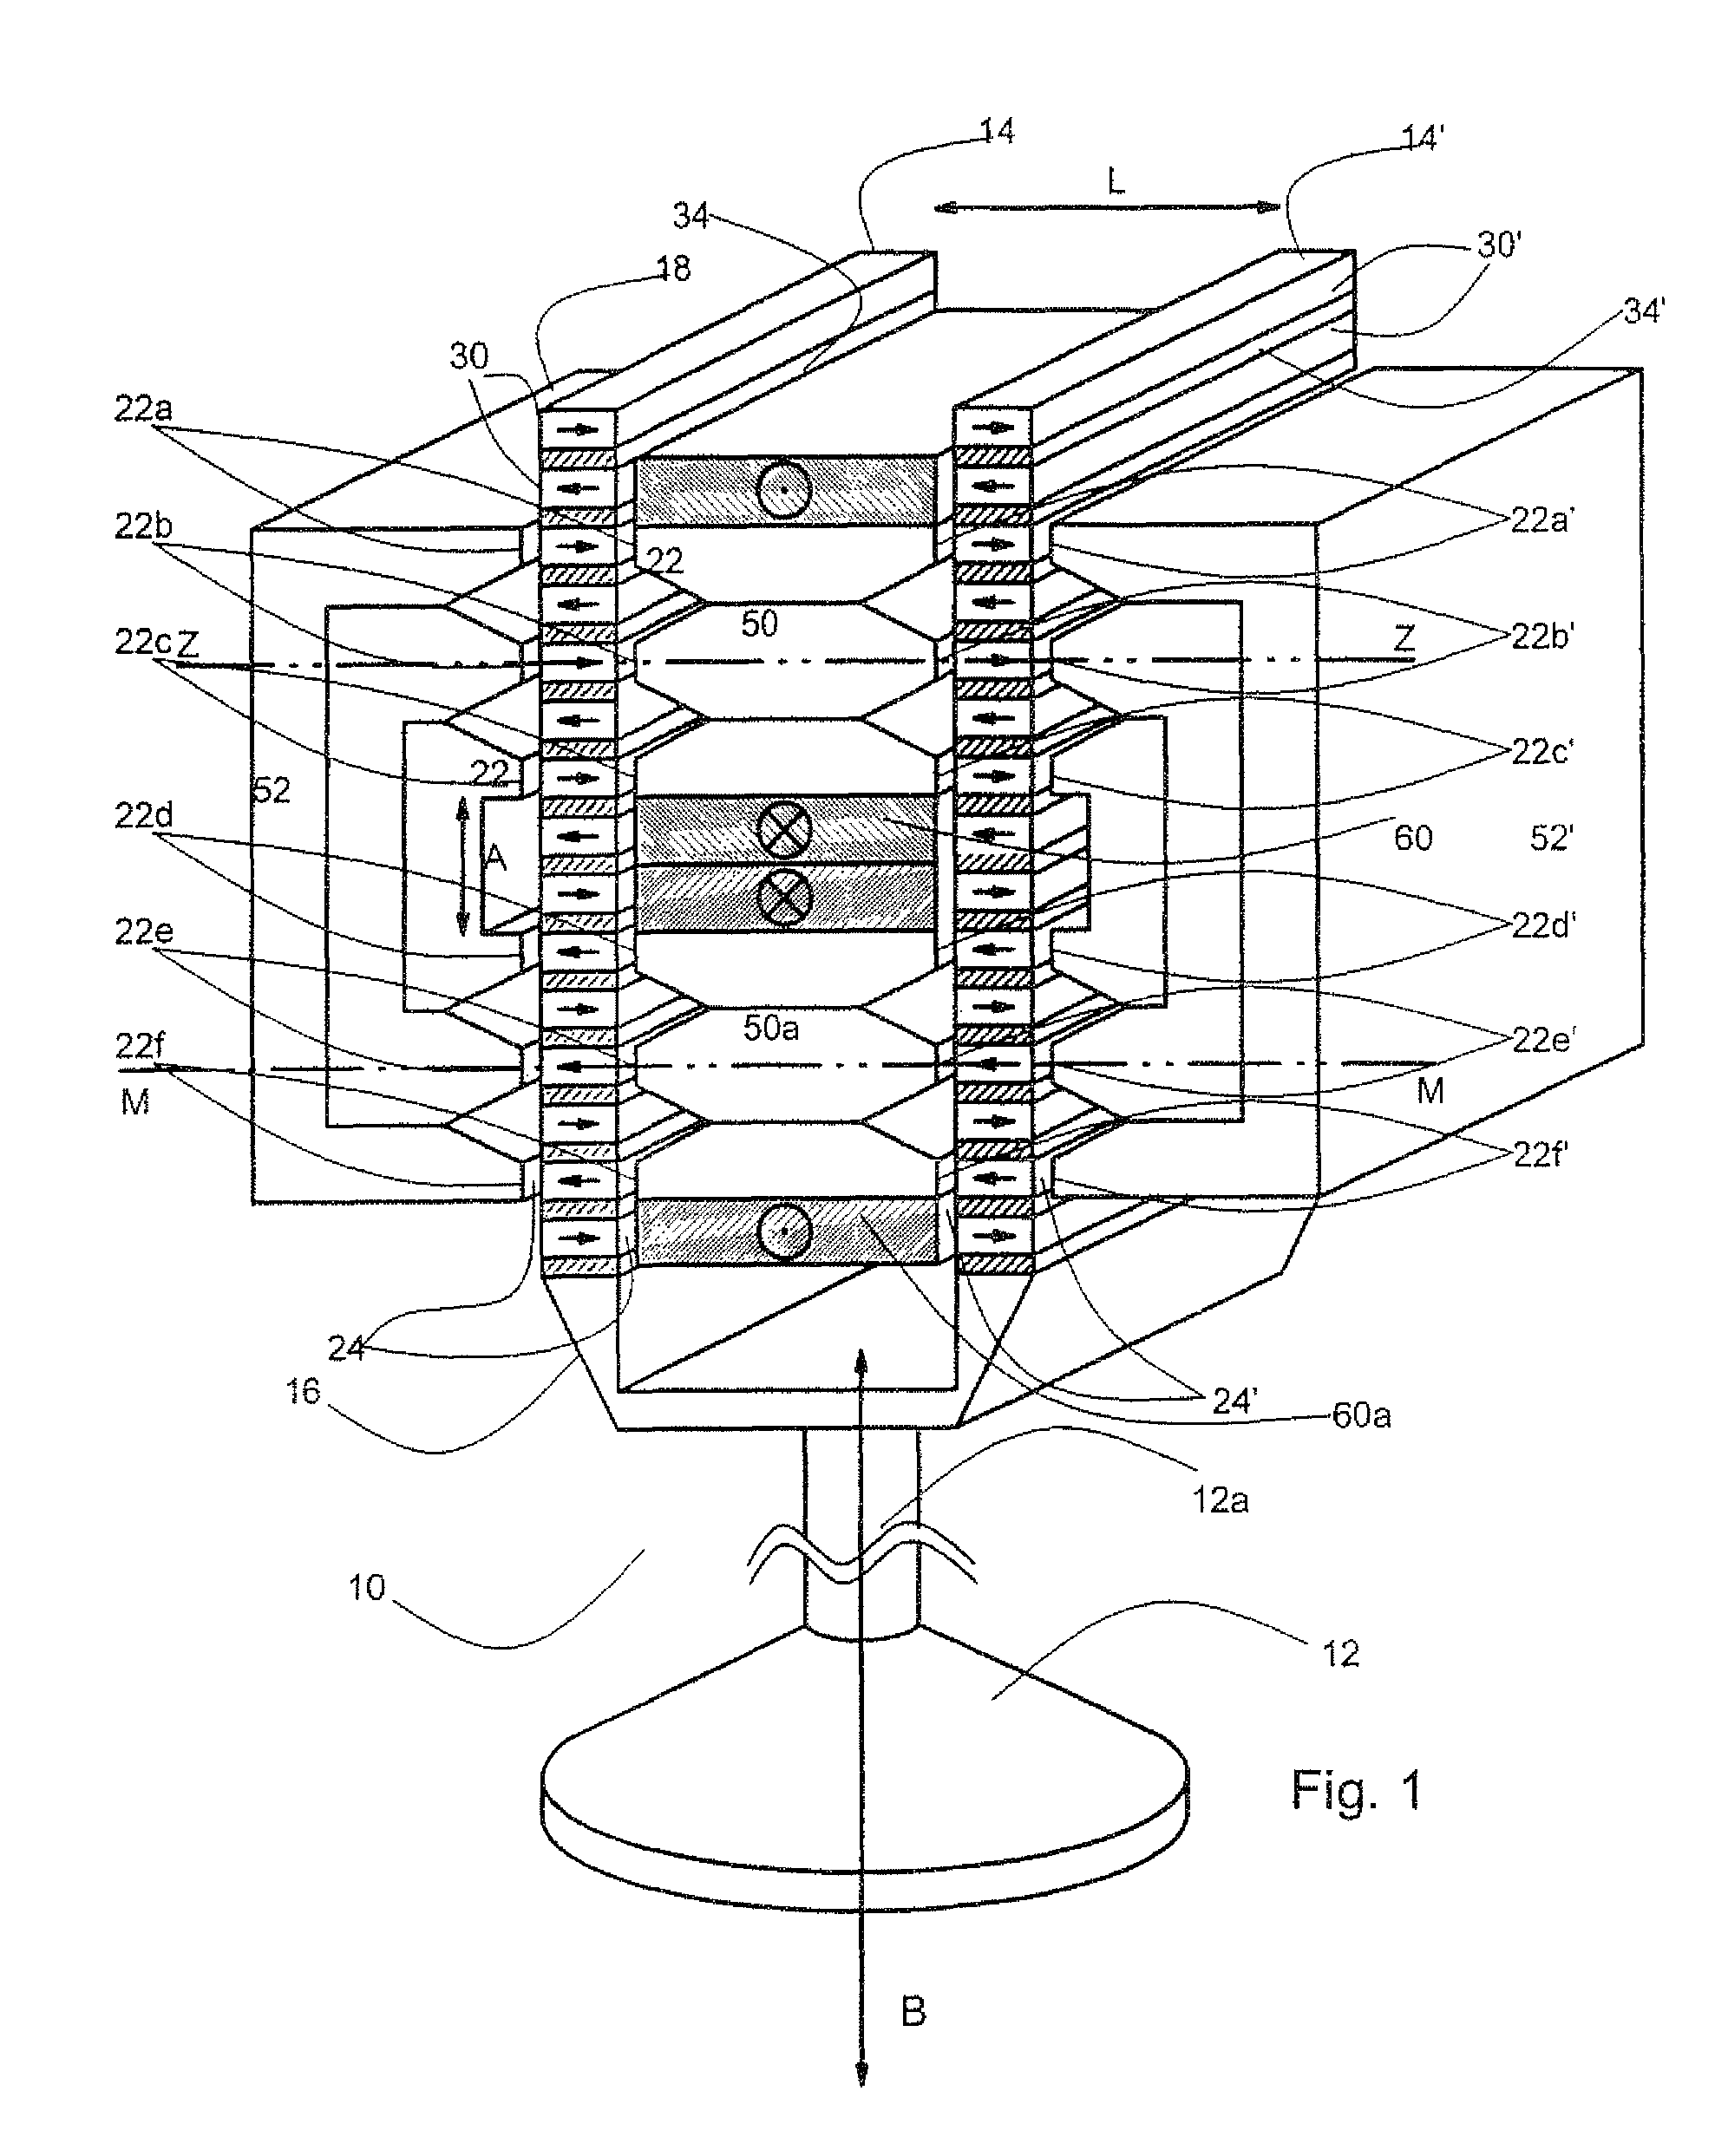 Gas exchange valve actuator for a valve-controlled internal combustion engine